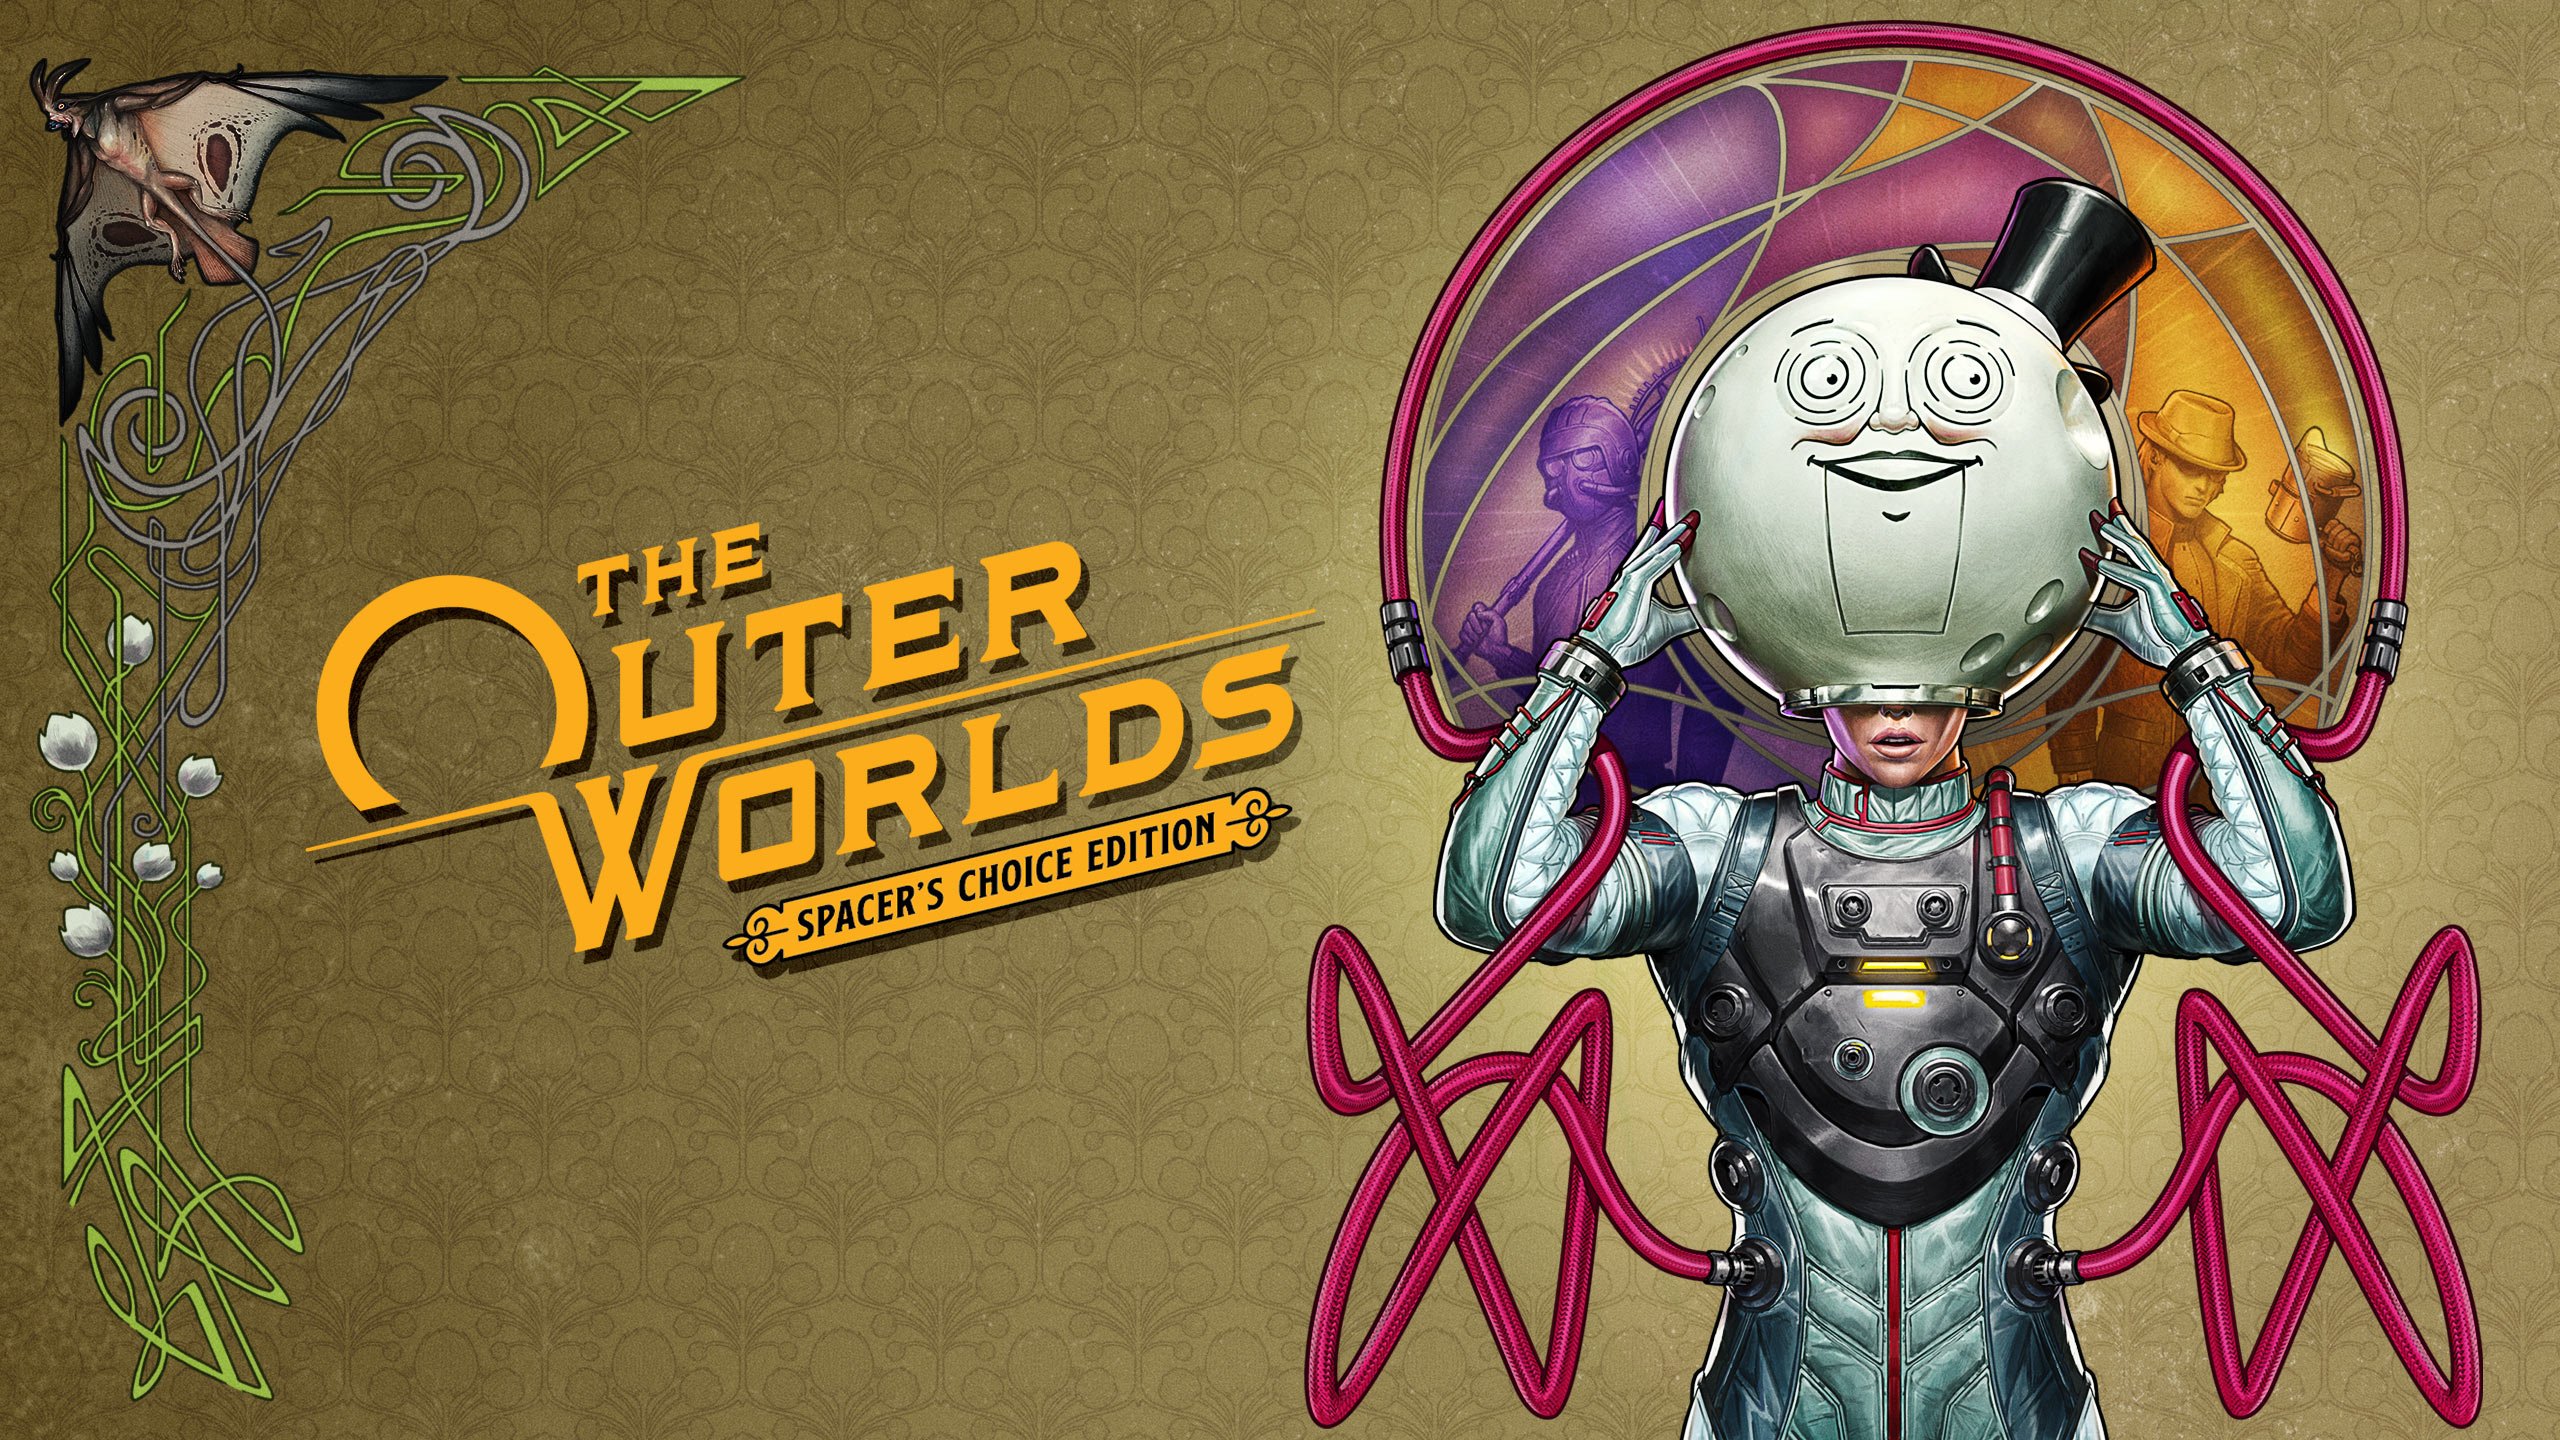 The Outer Worlds: Spacer's Choice Edition Coming Soon Games Store